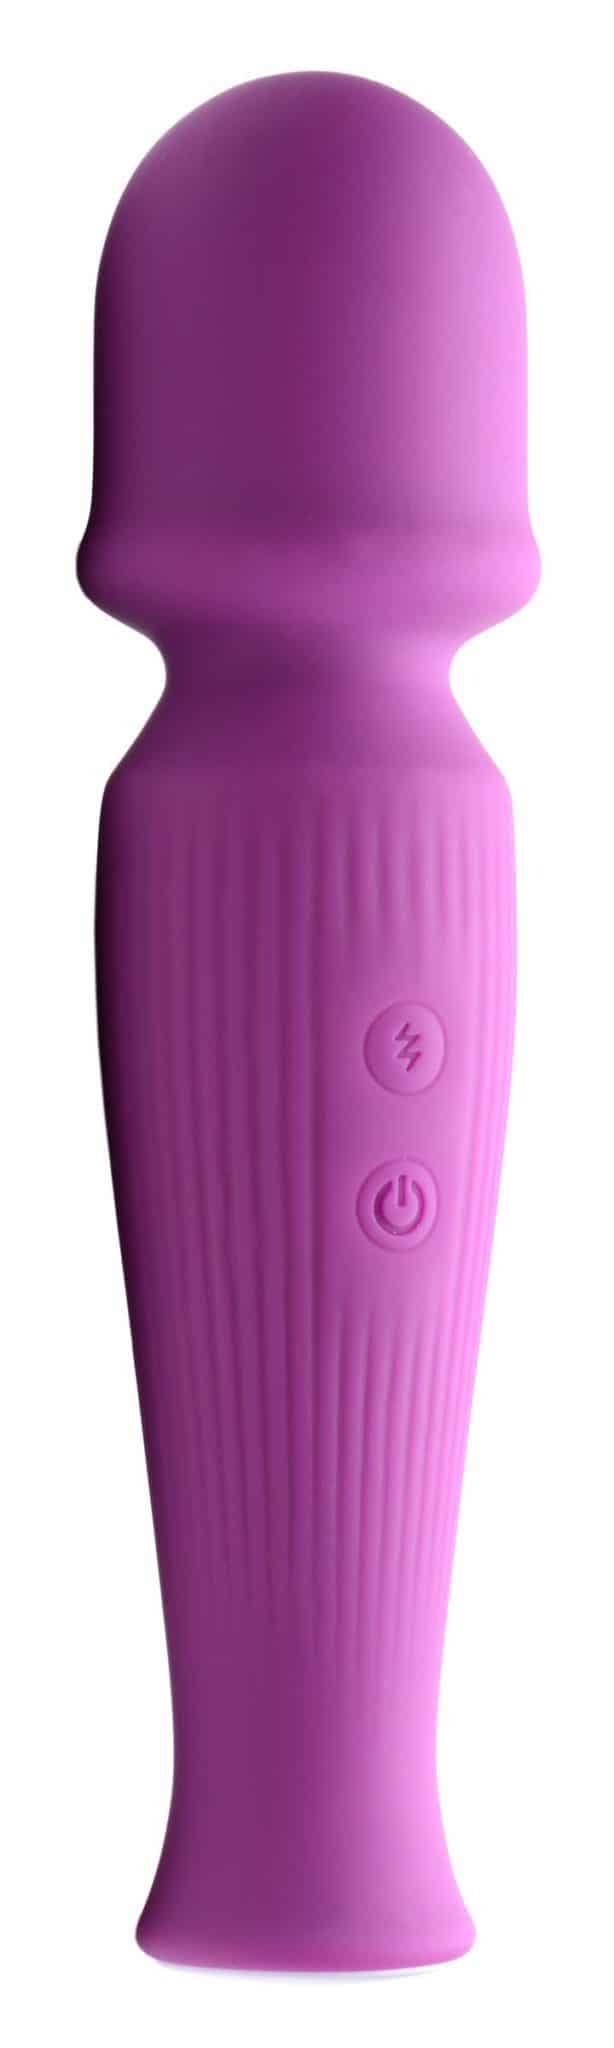 10X Silicone Wand Massager – Violet